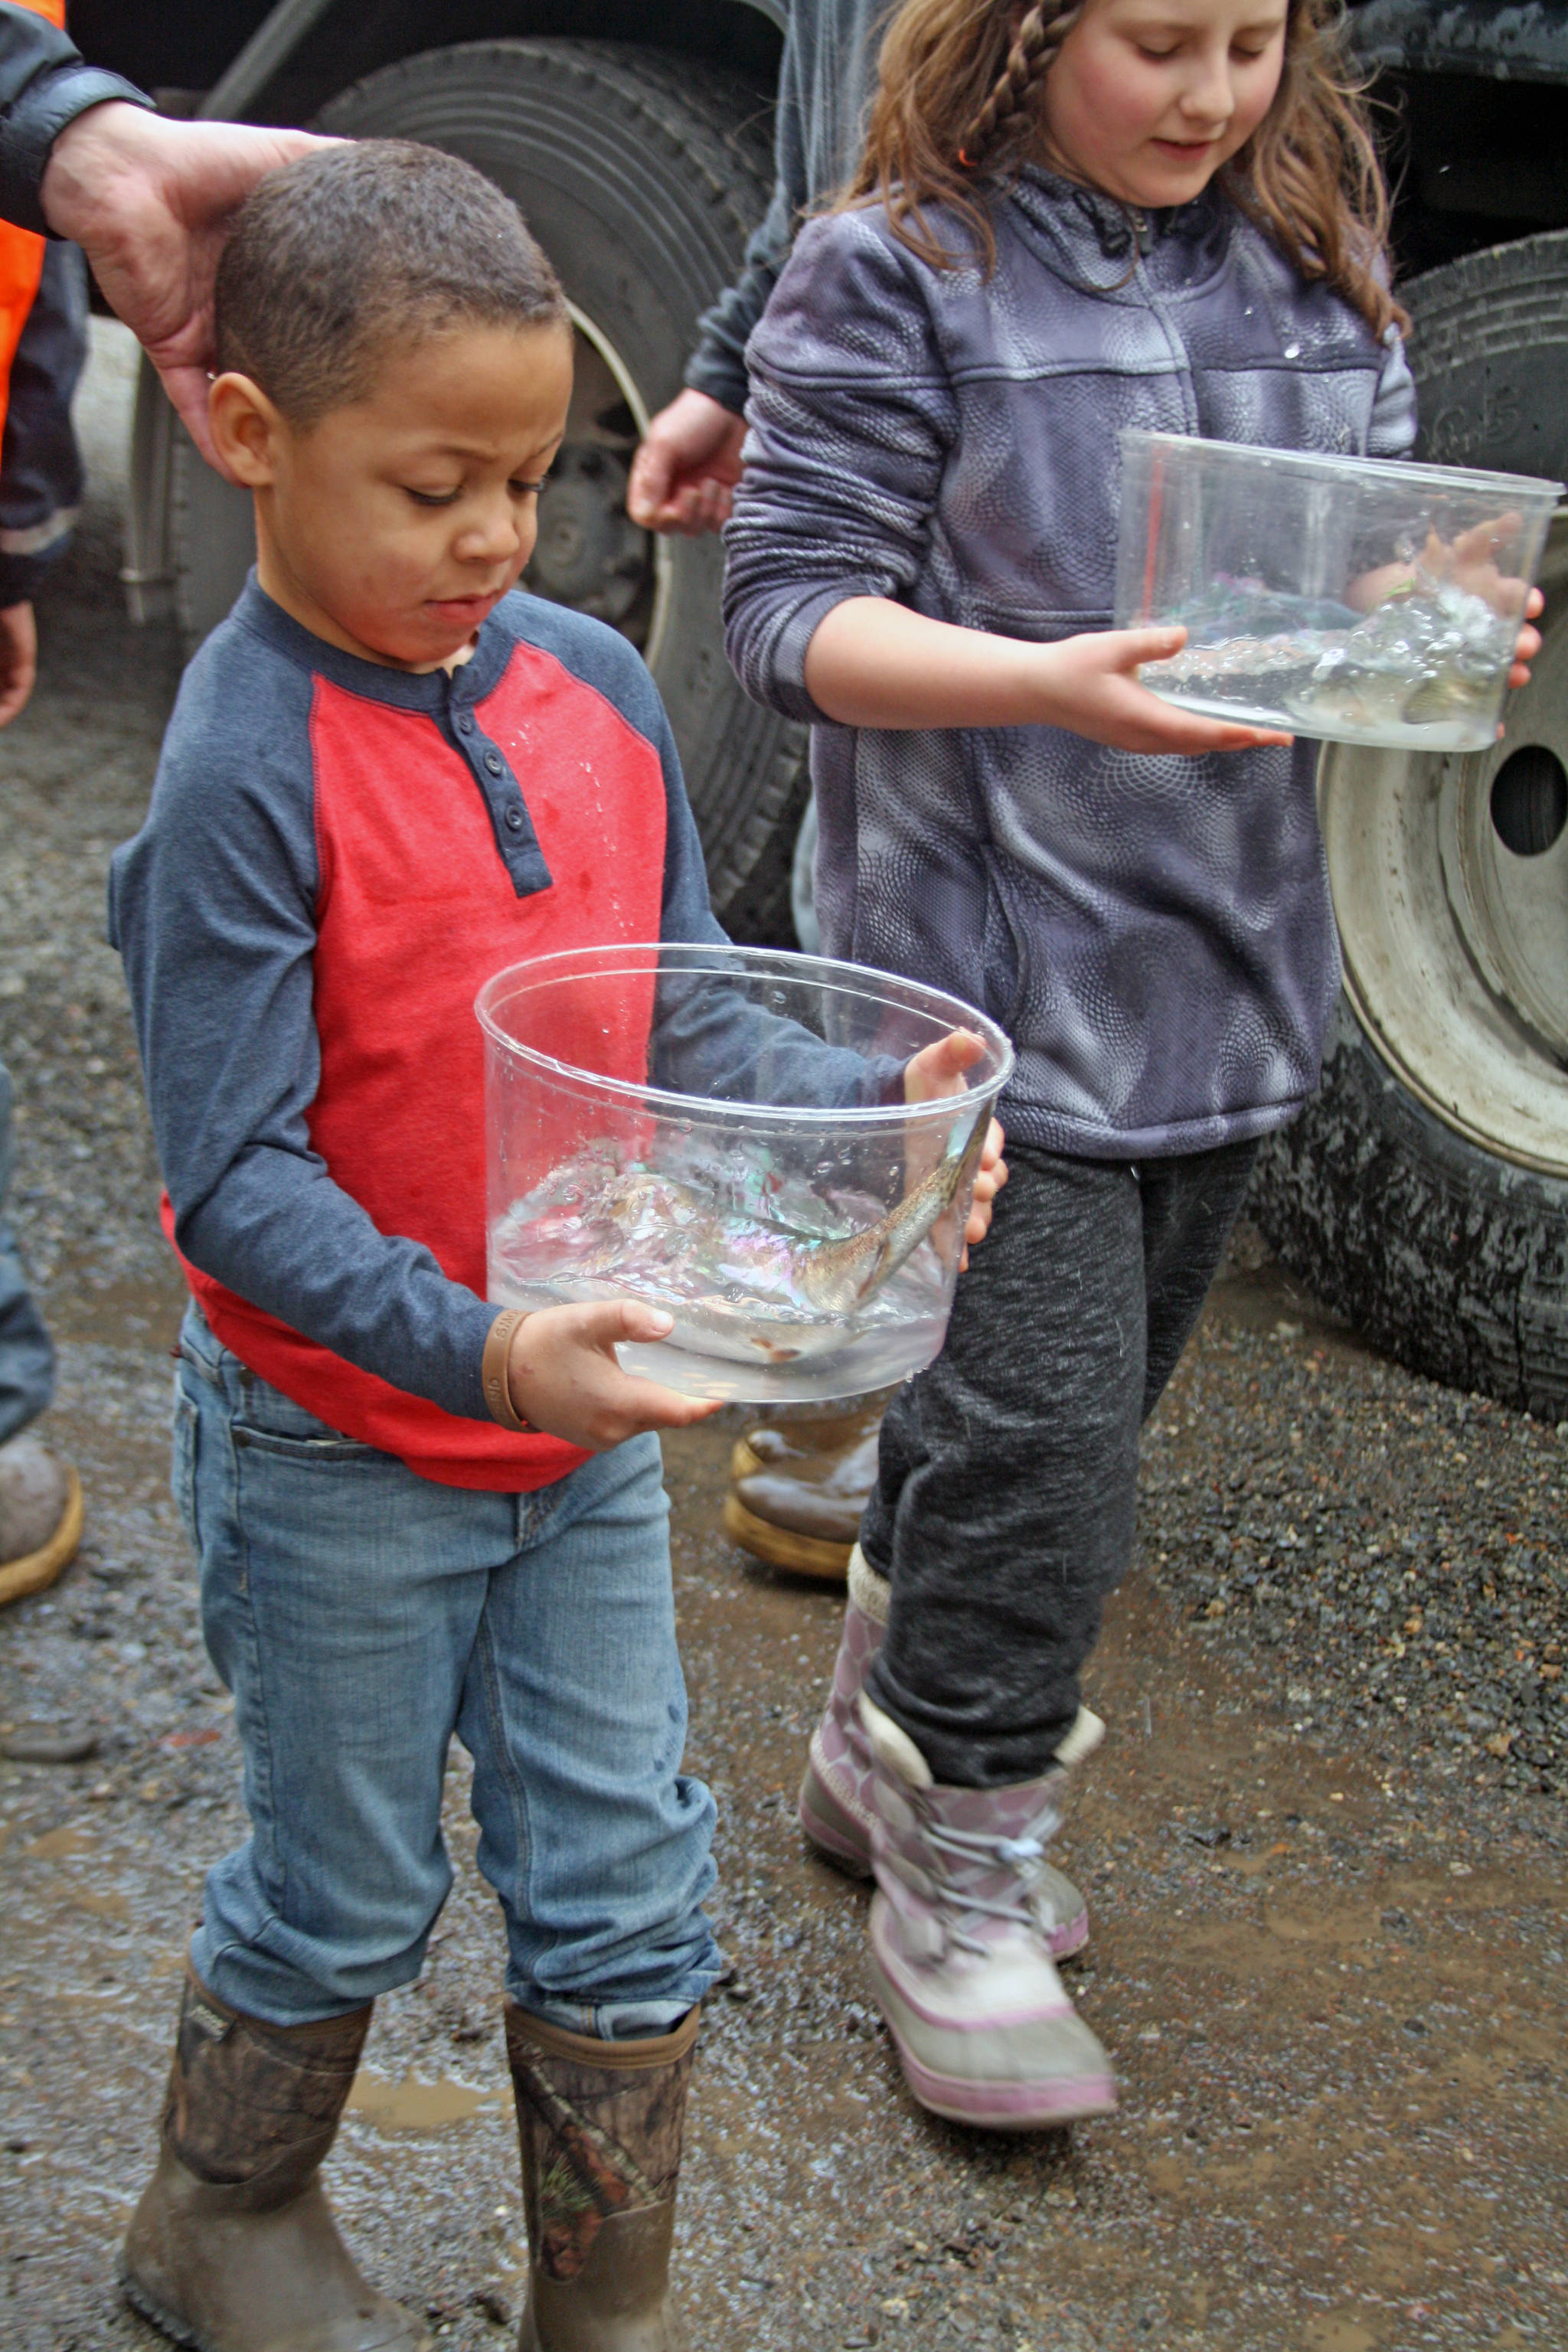 Students carry rainbow trout at Johnson Lake State Recreation Site in Kasilof. Approximately 950 borough students released 5,000 fish into Johnson Lake as part of an Alaska Department of Fish and Game restocking effort. (Photo by Erin Thompson/Peninsula Clarion)